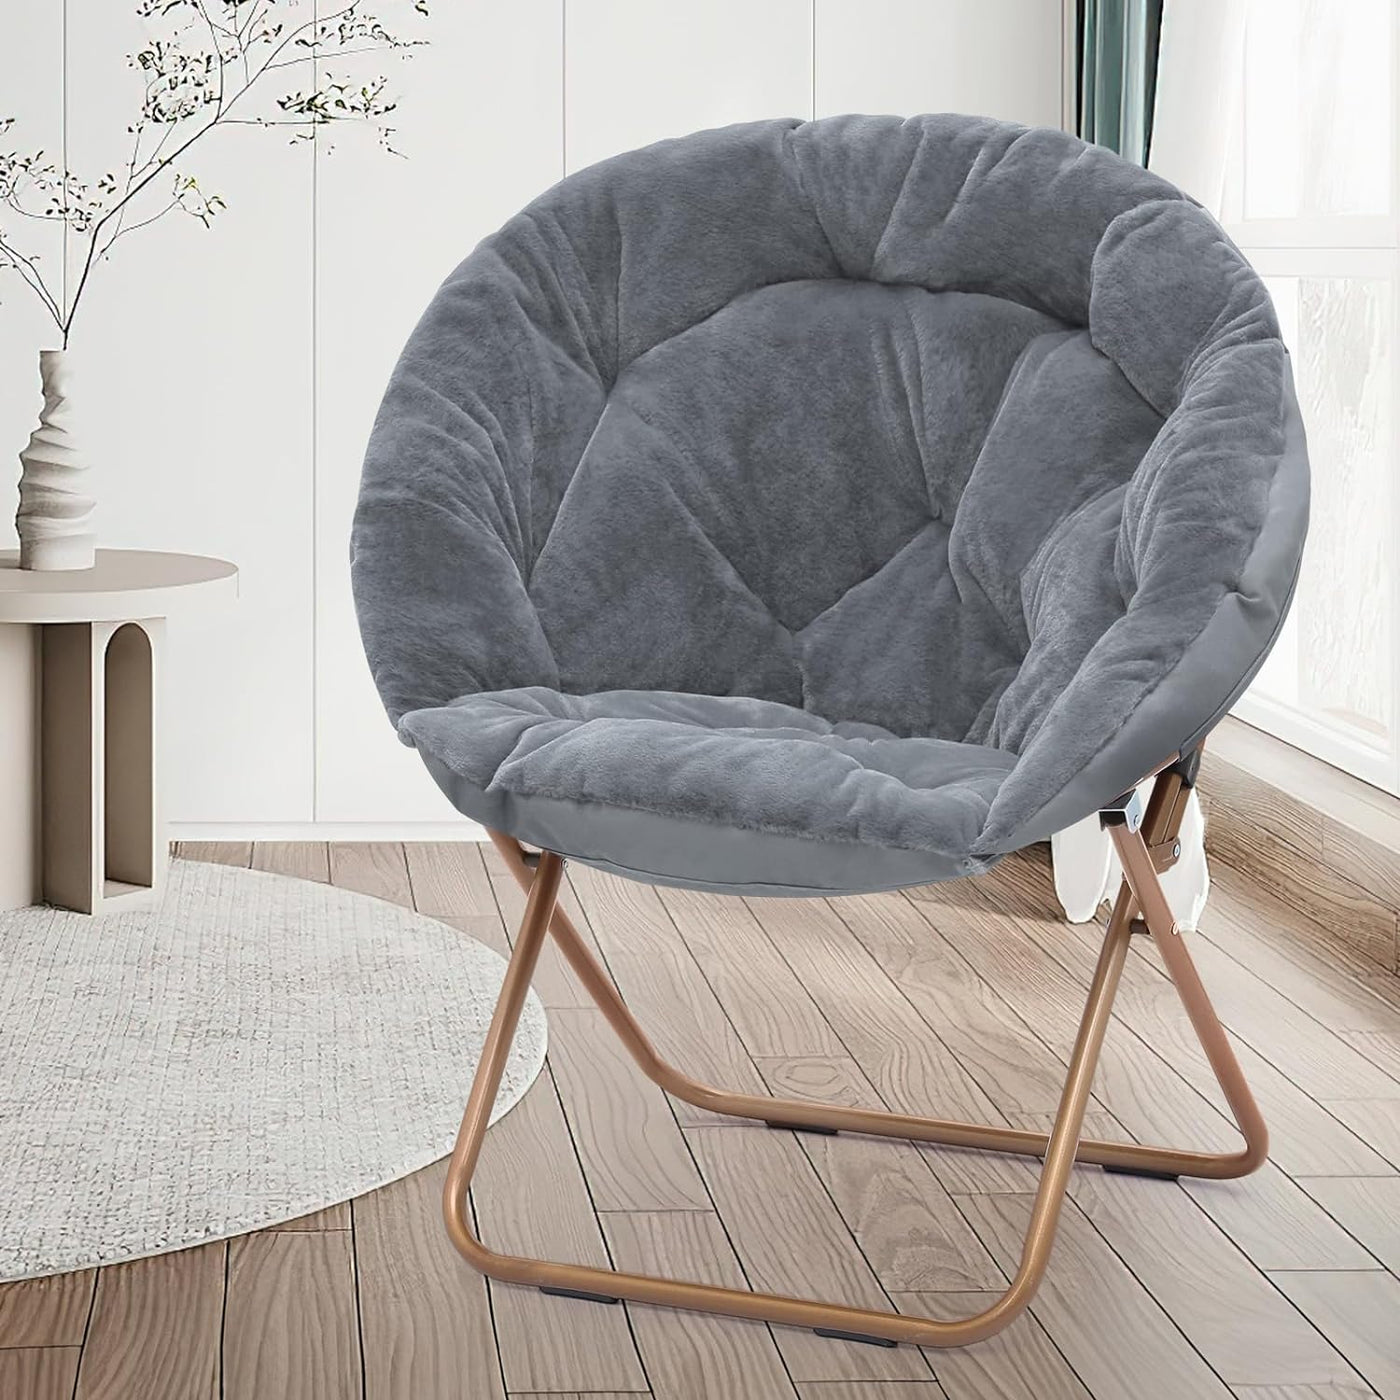 MoNiBloom Round Folding Faux Fur Saucer Chair Foldable Metal Frame (Gray) - $40